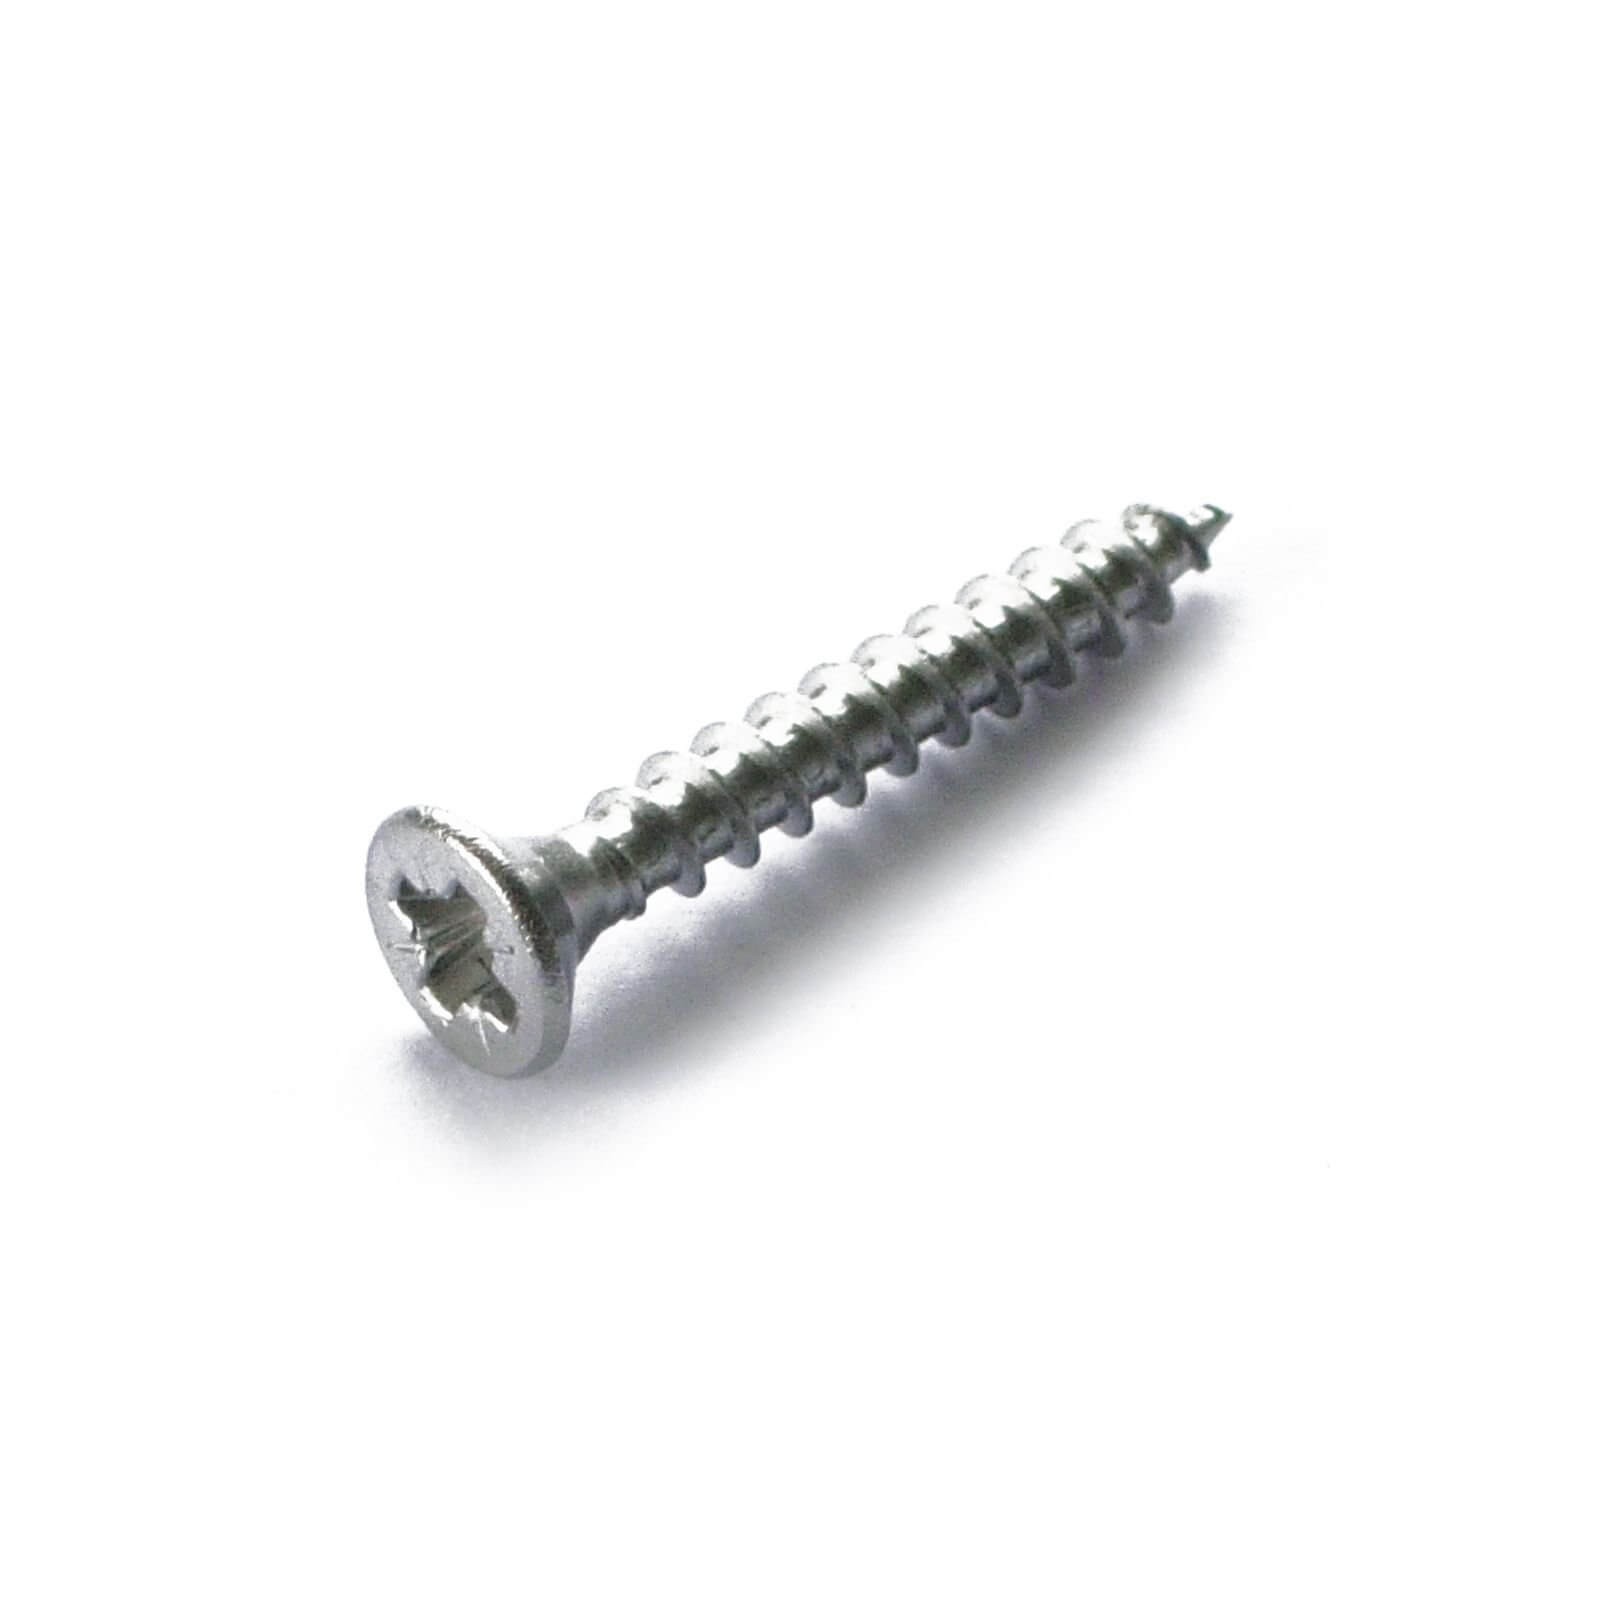 Single Thread Screw - Stainless Steel - 4 x 40mm - 25 Pack